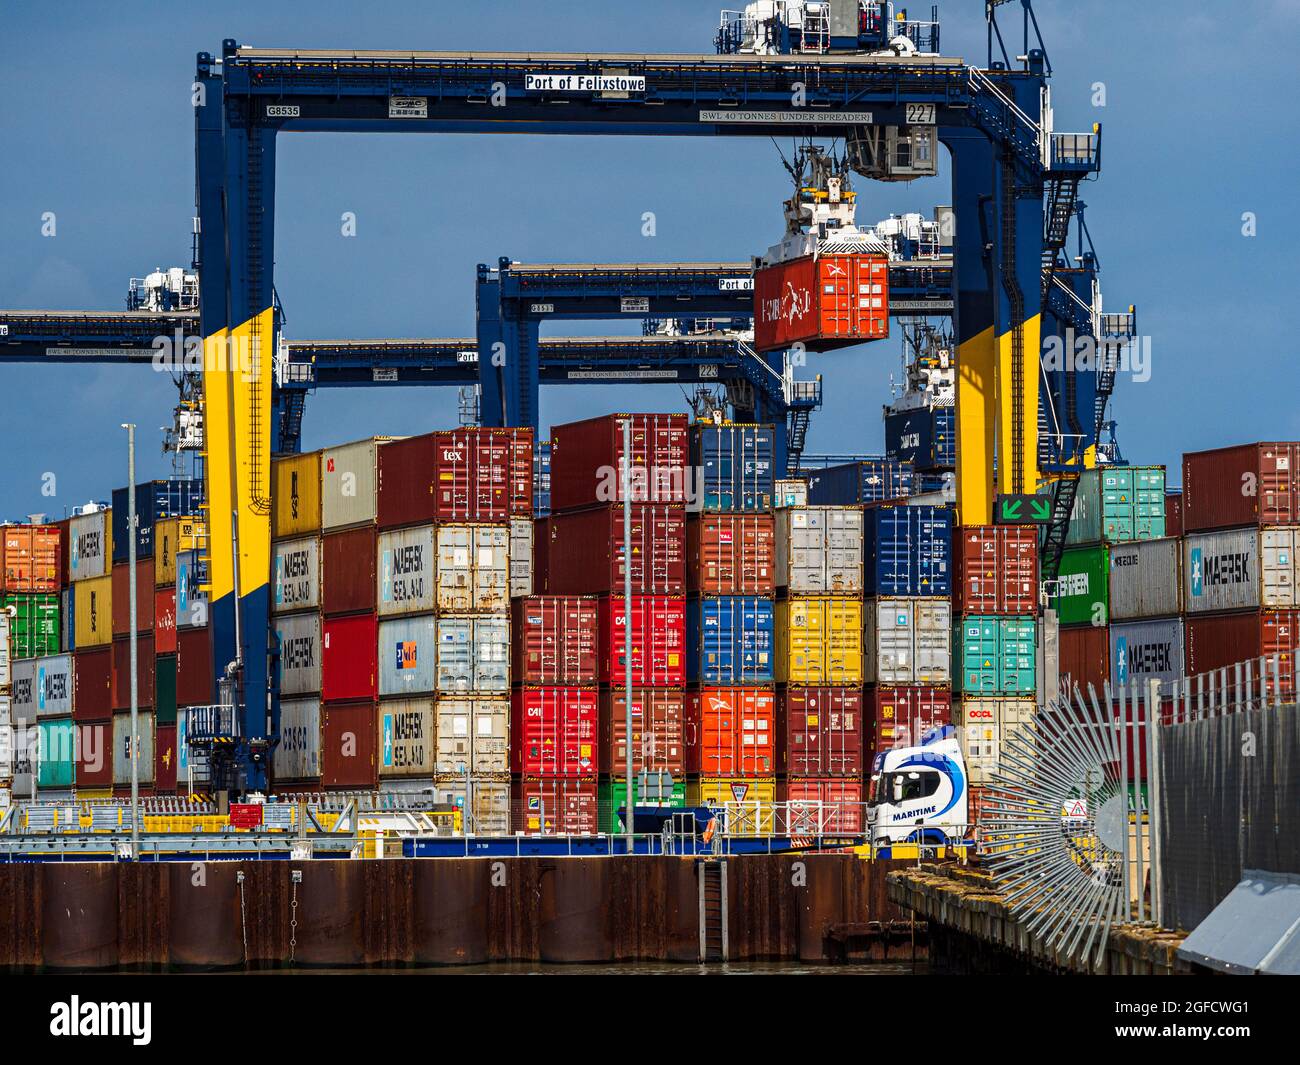 Global Supply Chains - Containers stacked on the dockside at the Port of Felixstowe UK. Global Supply Chain Congestion. Stock Photo